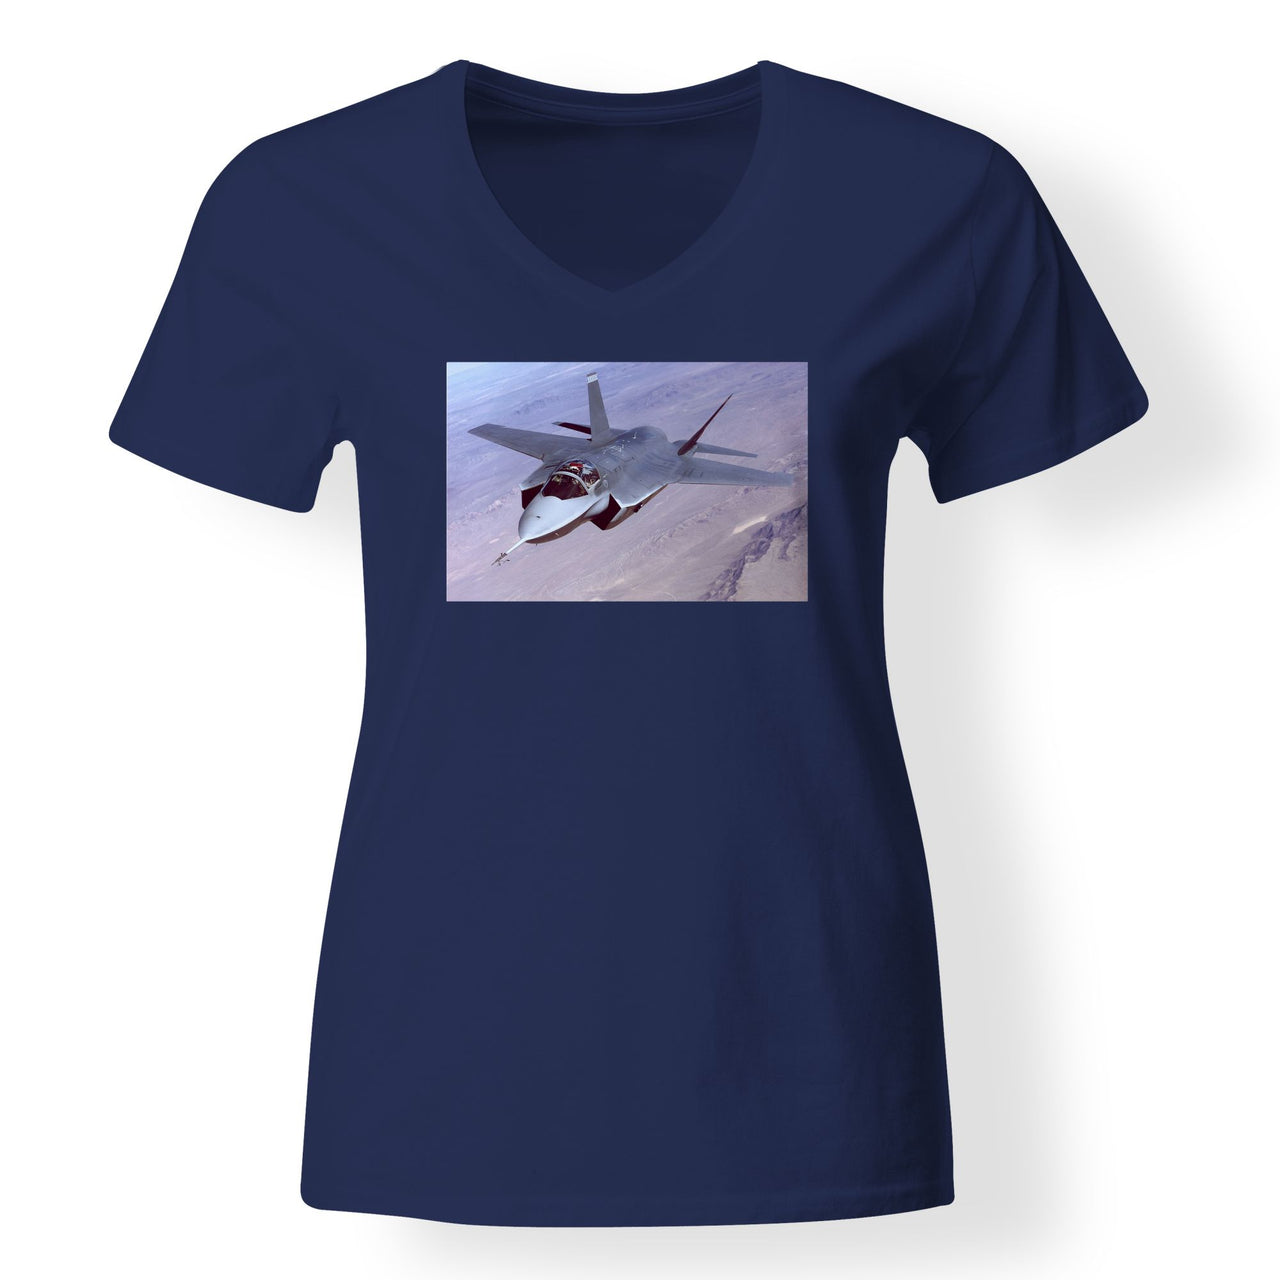 Fighting Falcon F35 Captured in the Air Designed V-Neck T-Shirts